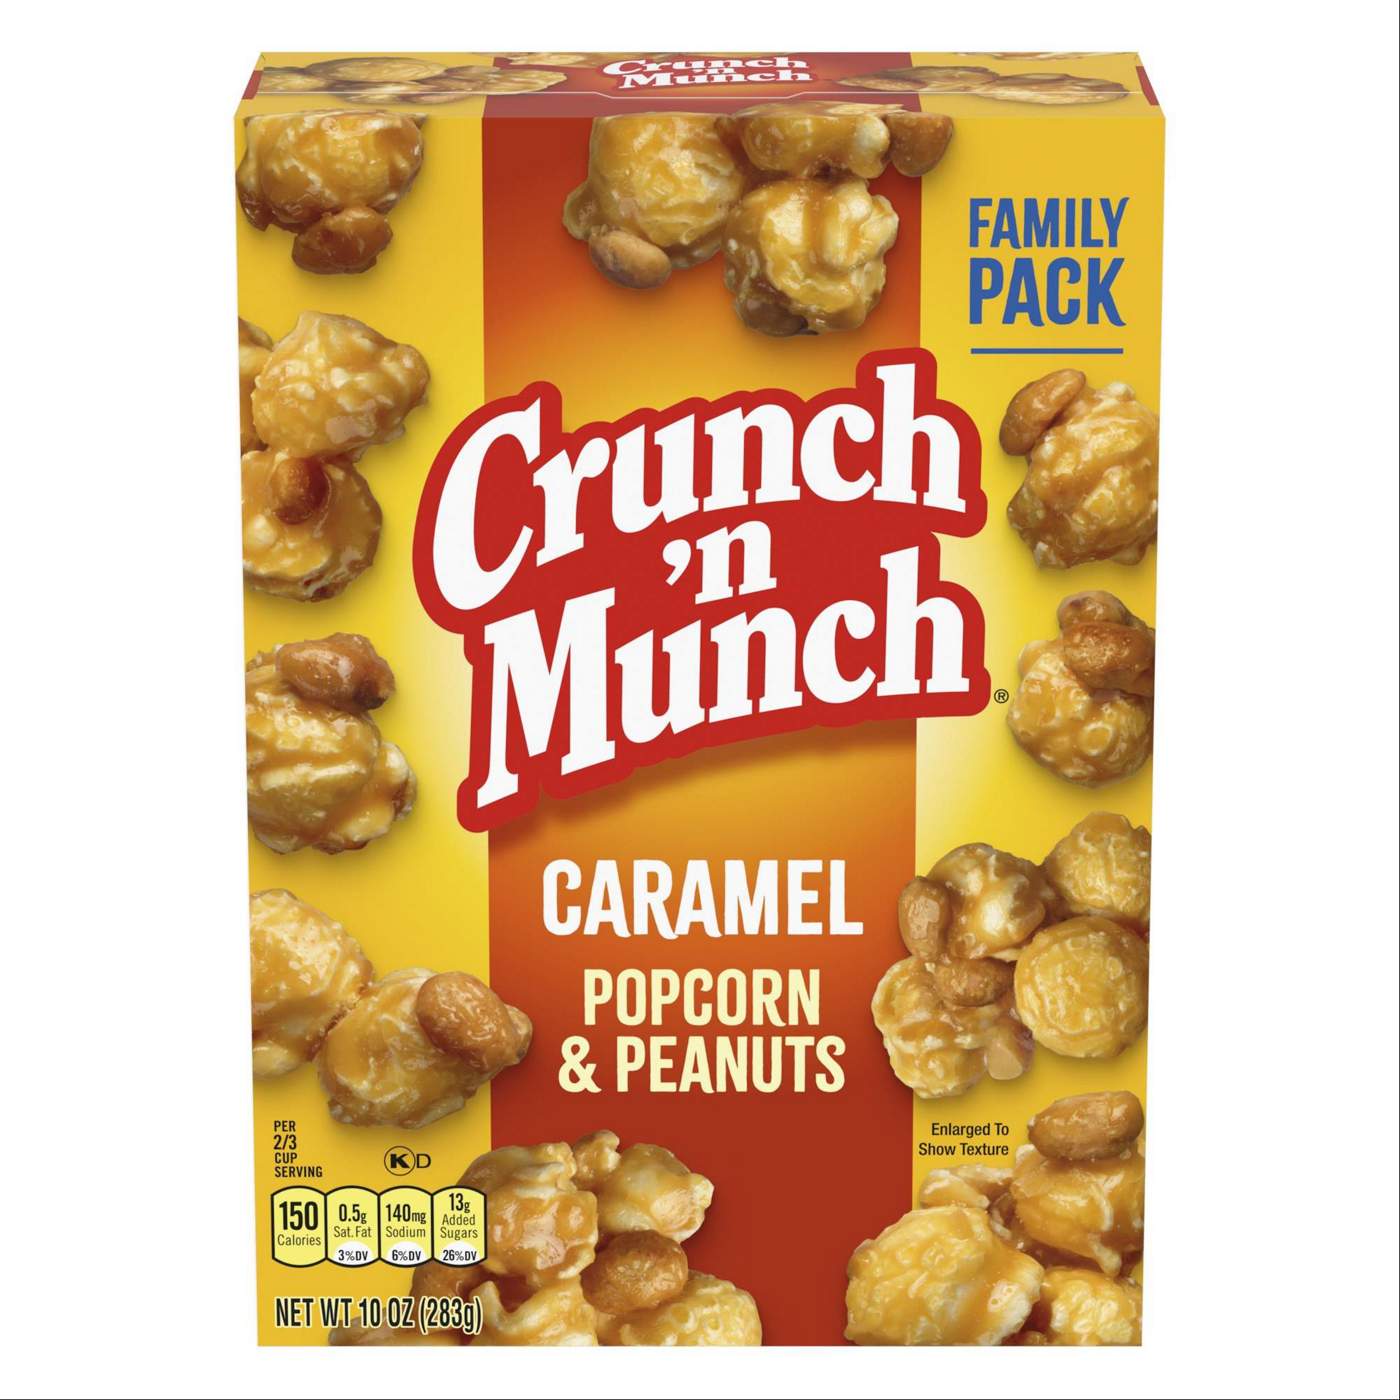 Crunch 'n Munch Caramel Popcorn with Peanuts; image 1 of 4